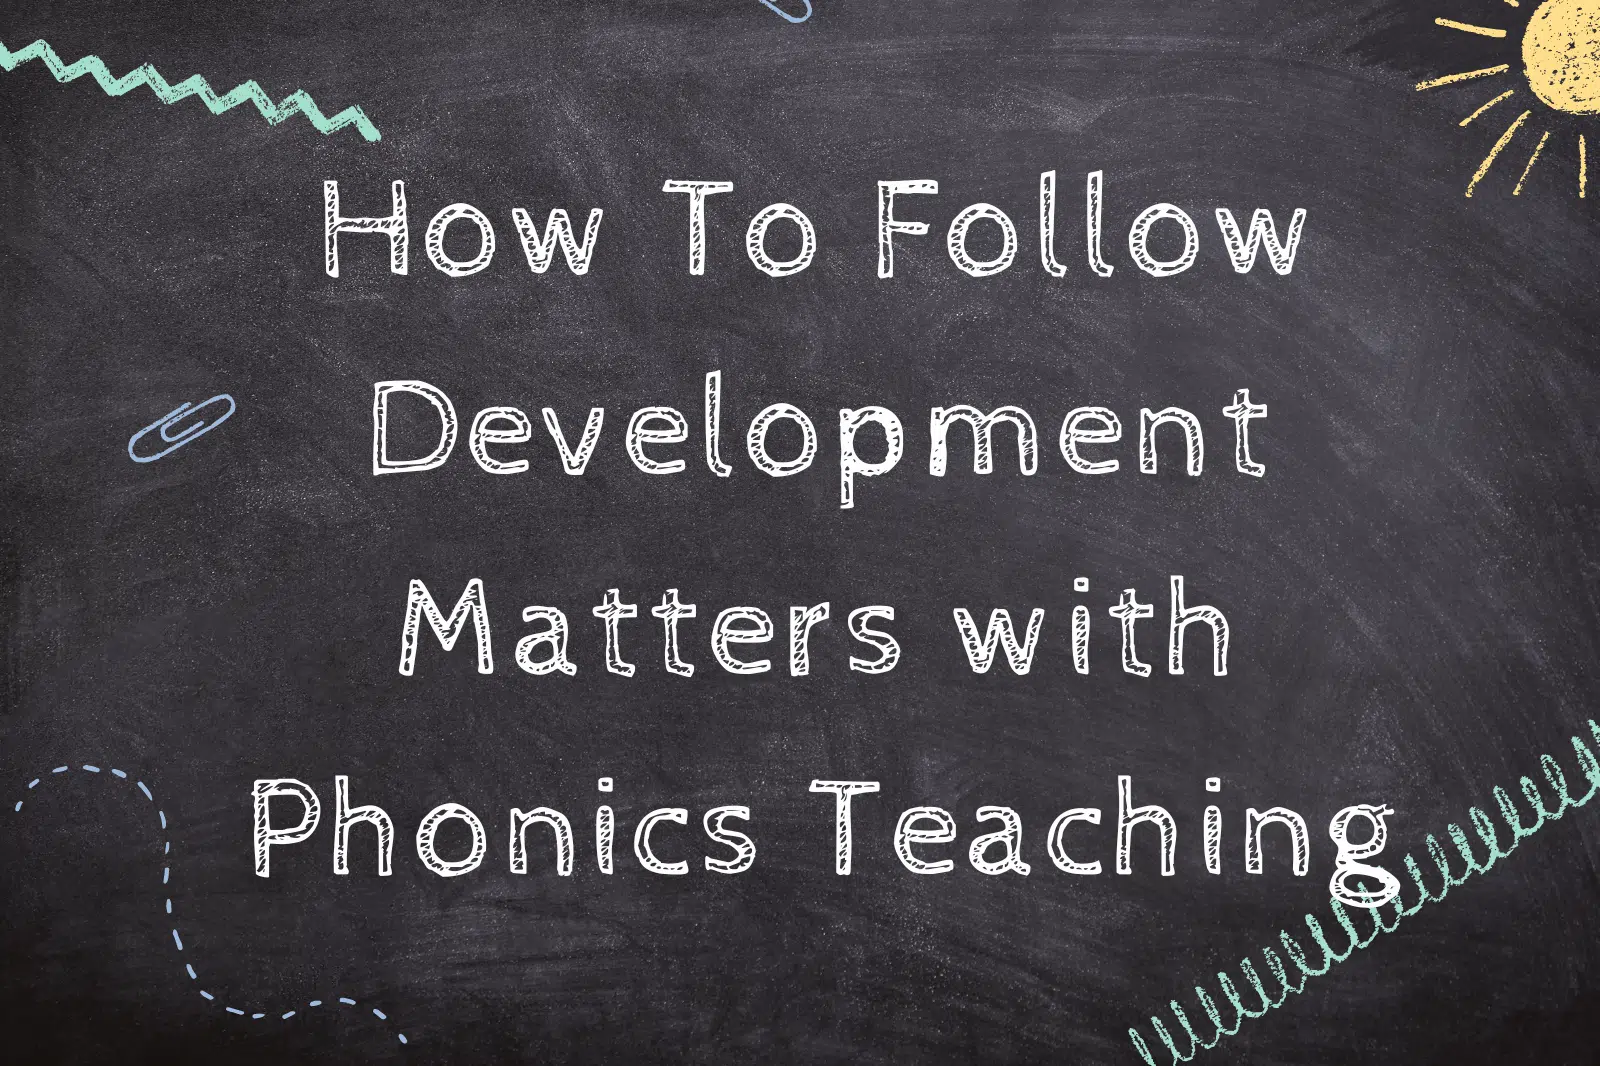 How To Follow Development Matters with Phonics Teaching